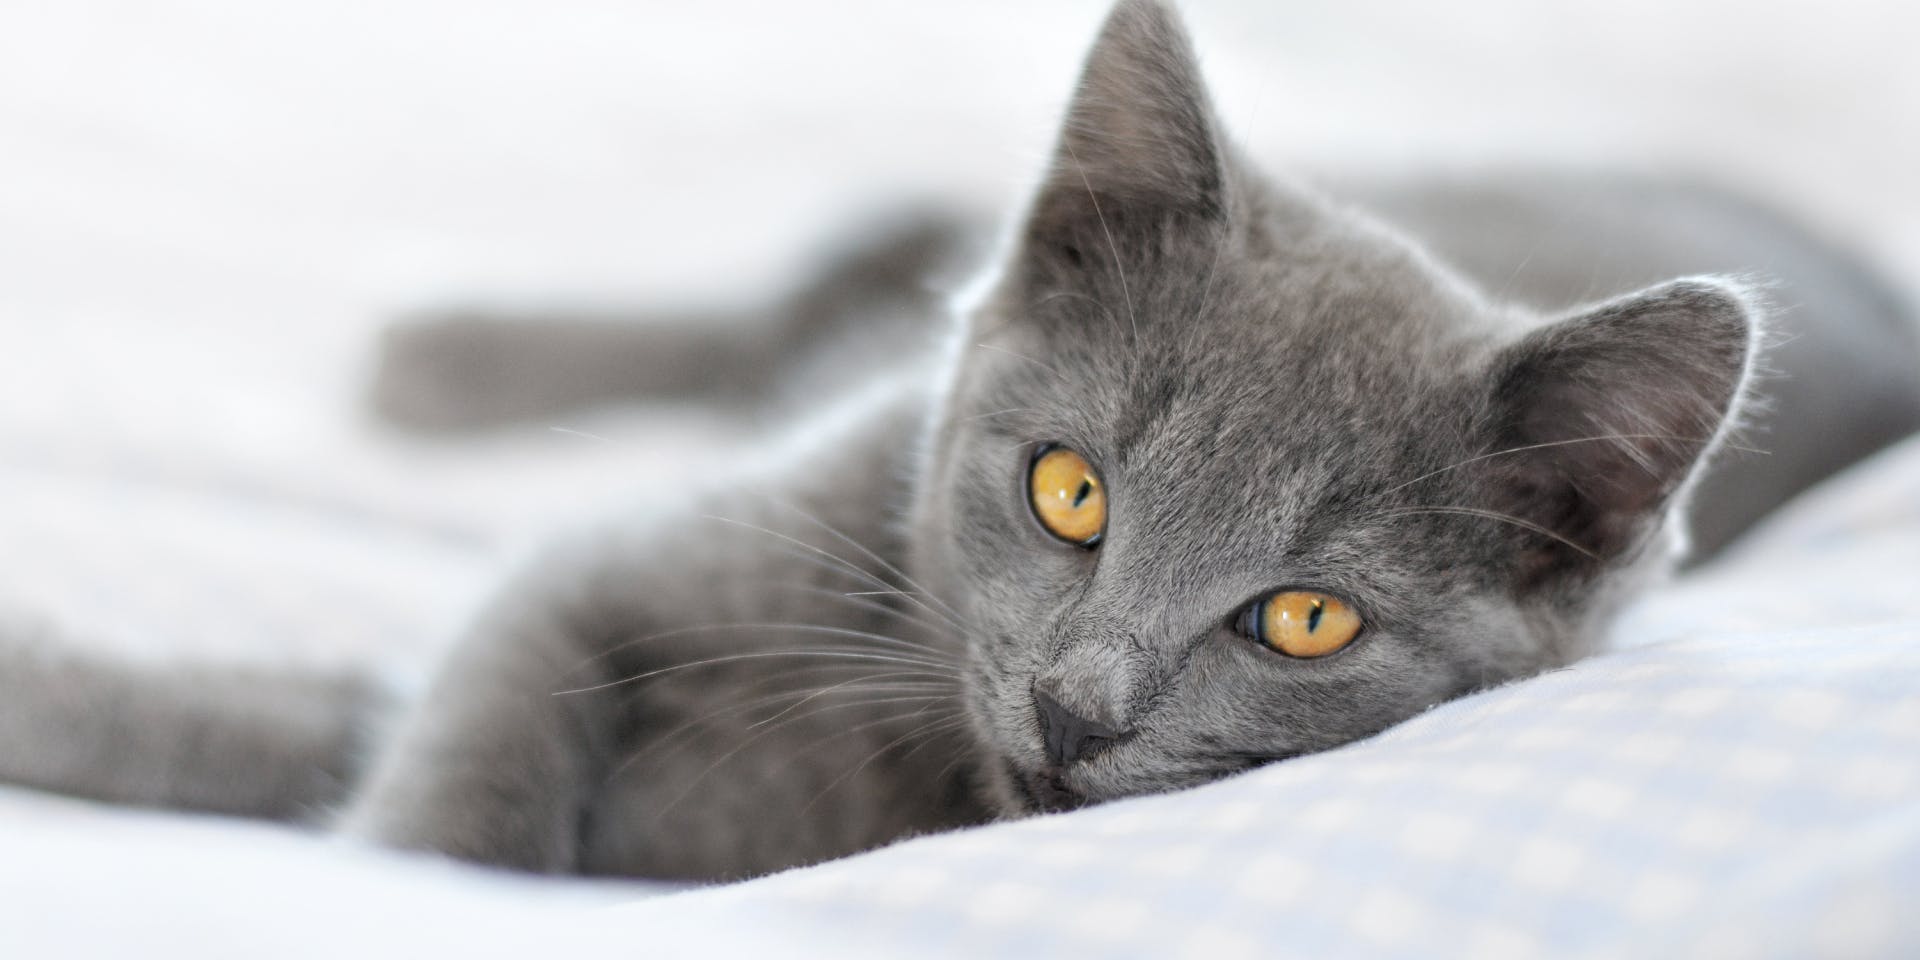 A gray cat with bright yellow eyes.